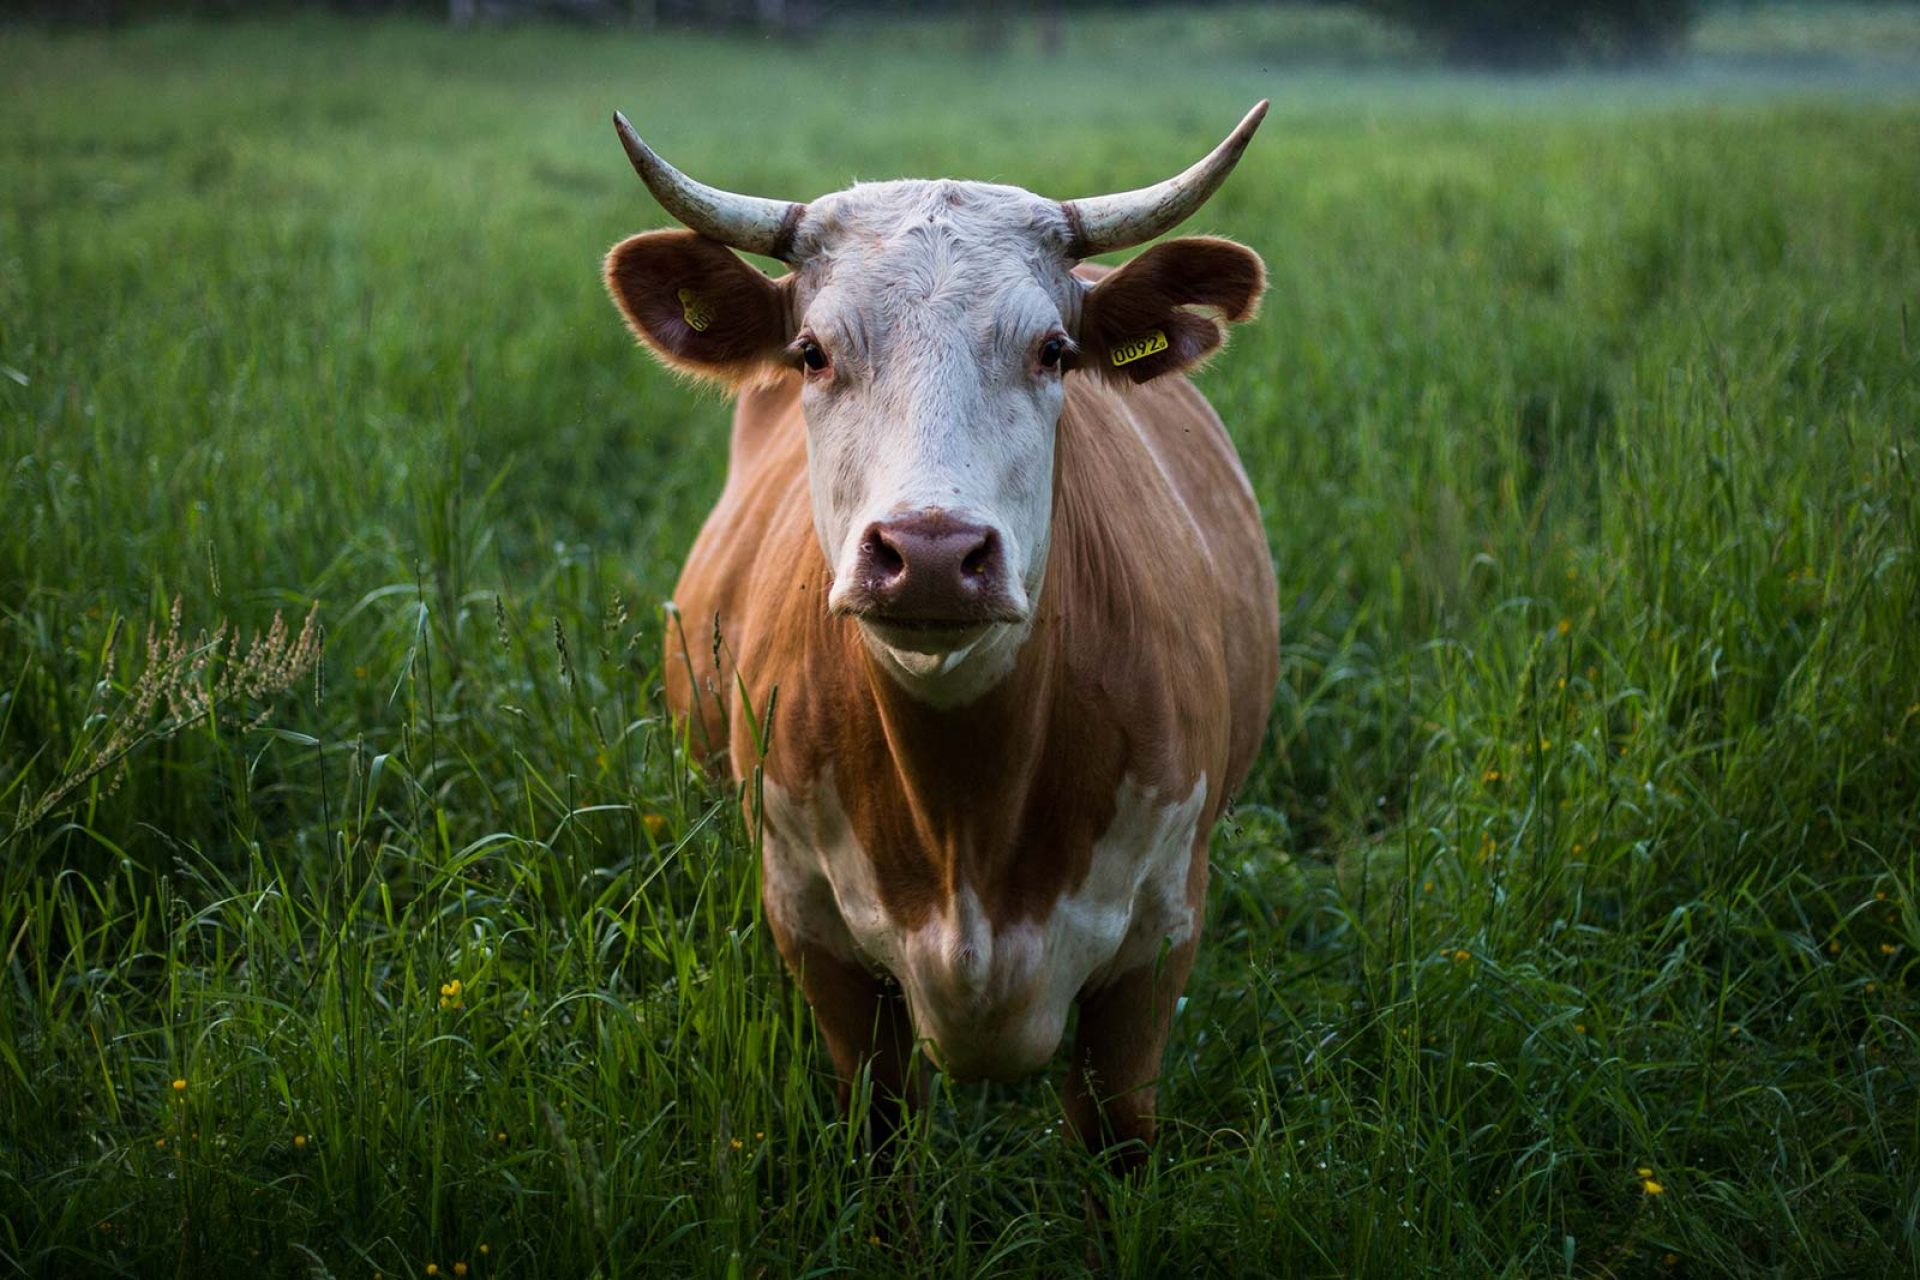 Horned brown cow with white face staring straight at camera and standing in grass field